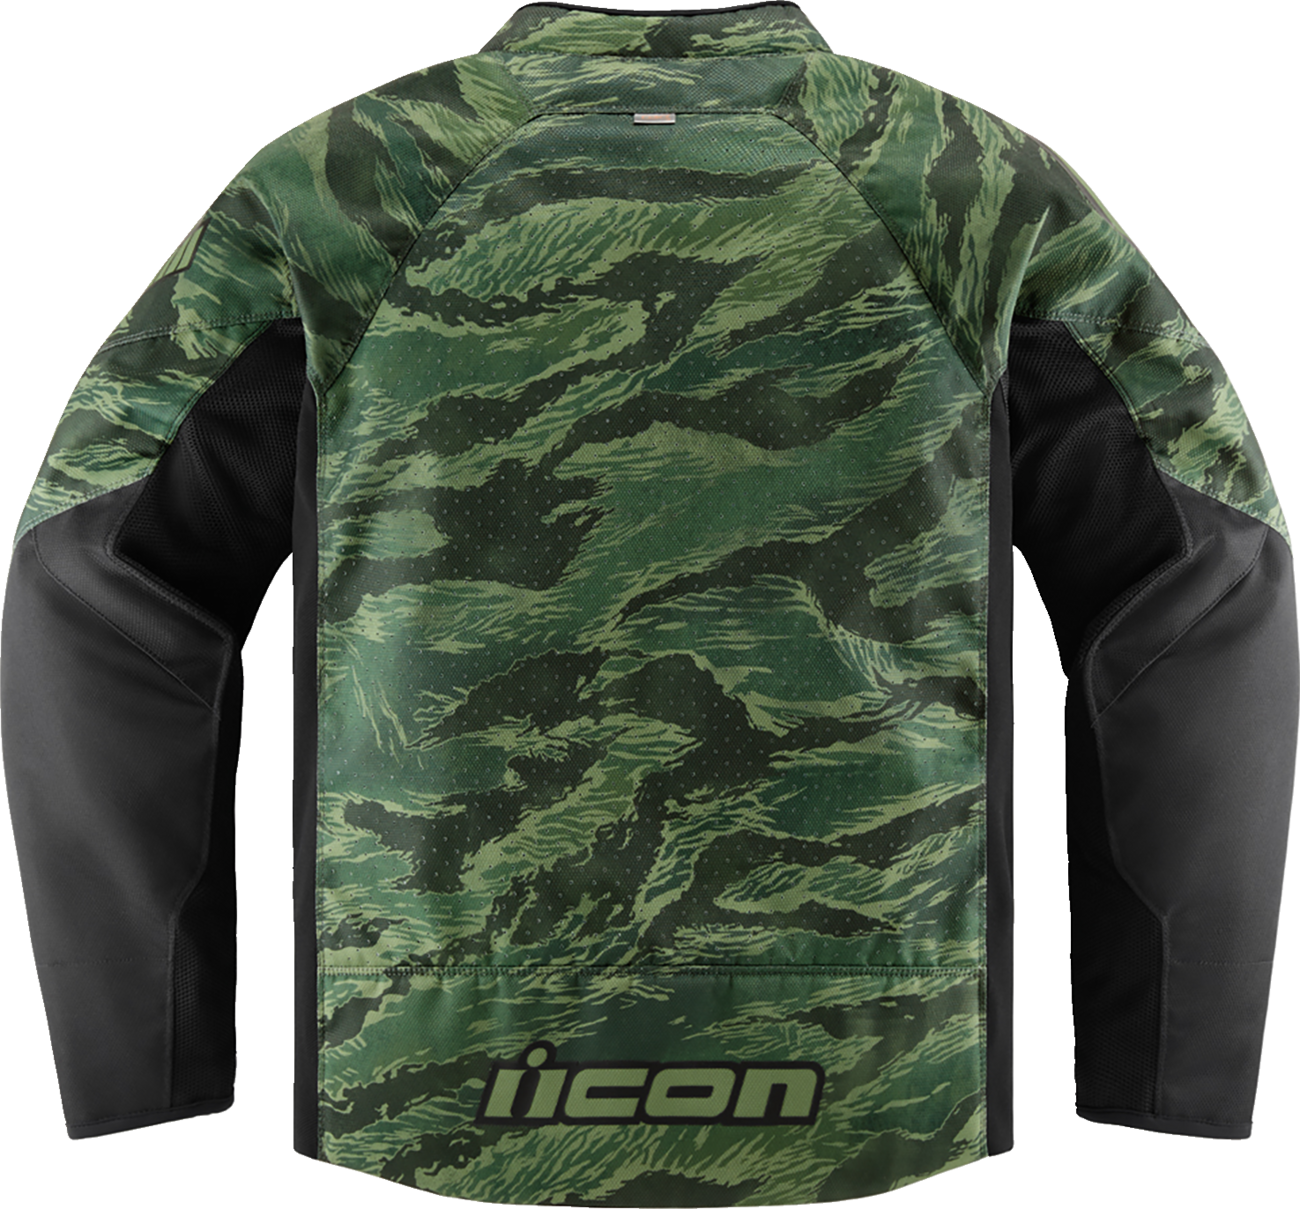 ICON Hooligan CE Tiger's Blood Jacket - Green - Small 2820-6152